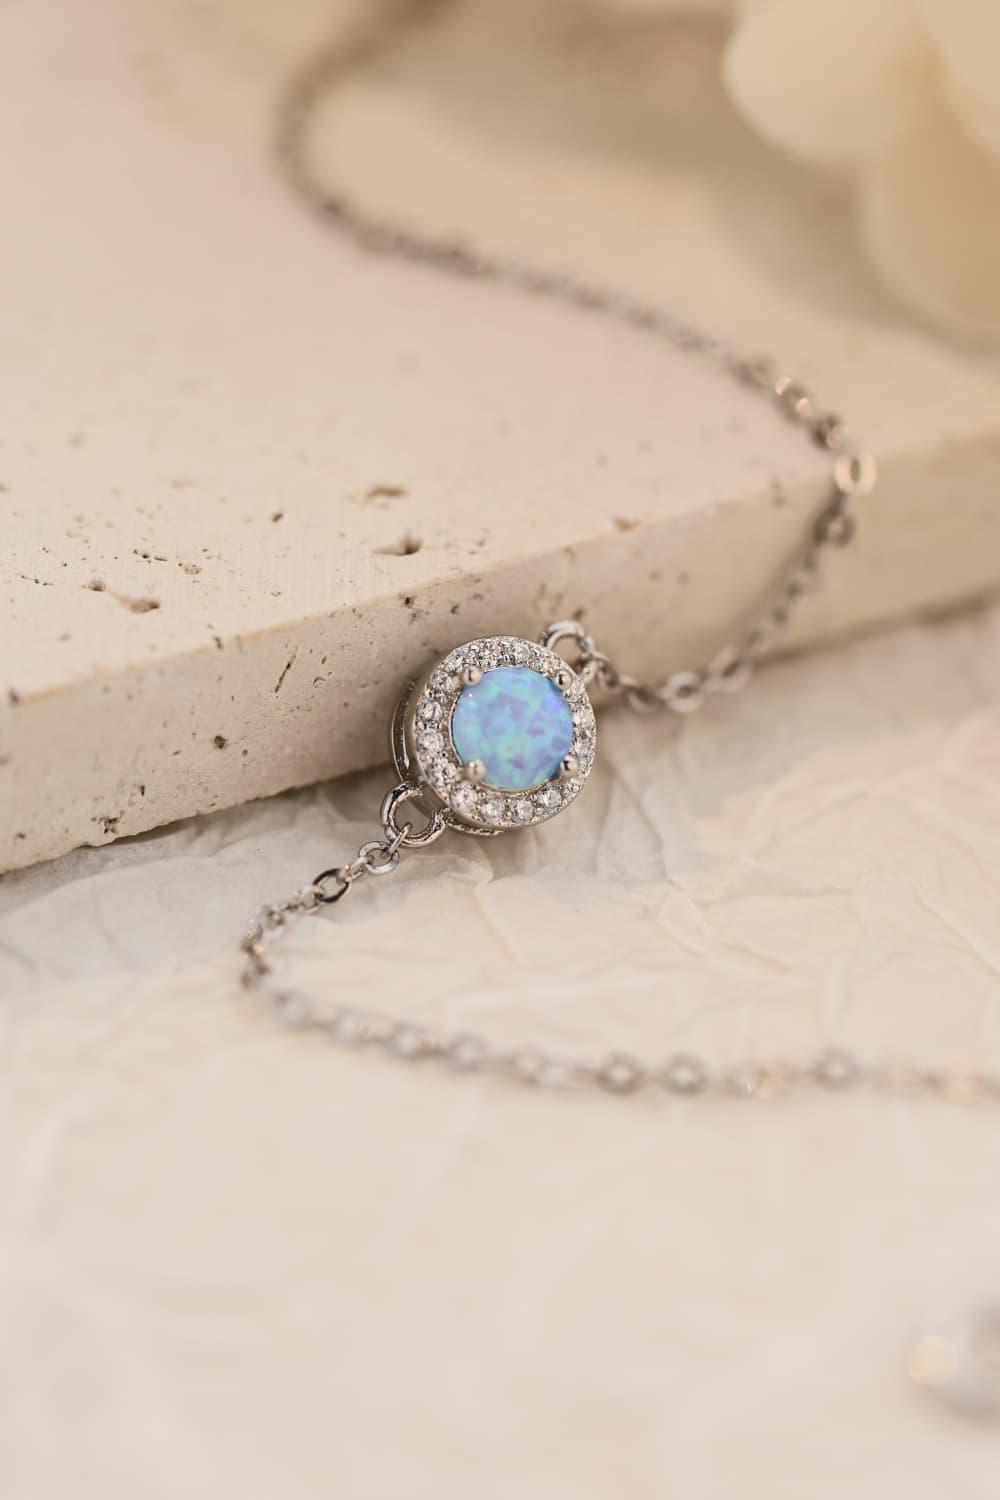 Love You Too Much Opal Bracelet - Crazy Like a Daisy Boutique #